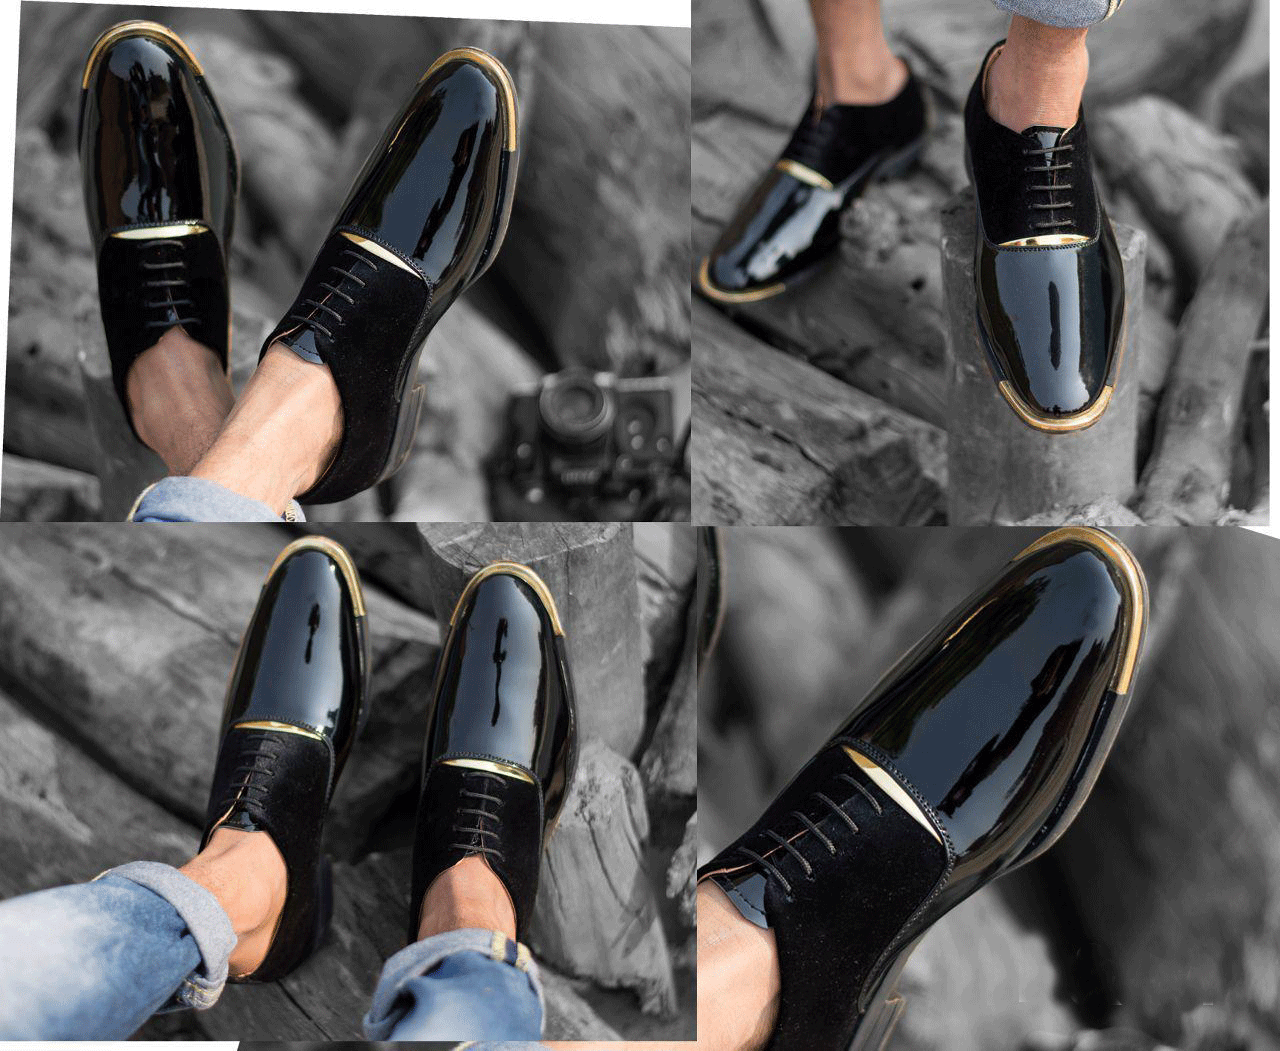 Mens Shiny Wear Premium Design High Quality Faux Leather Oxford Formal Shoes-Unique and Classy